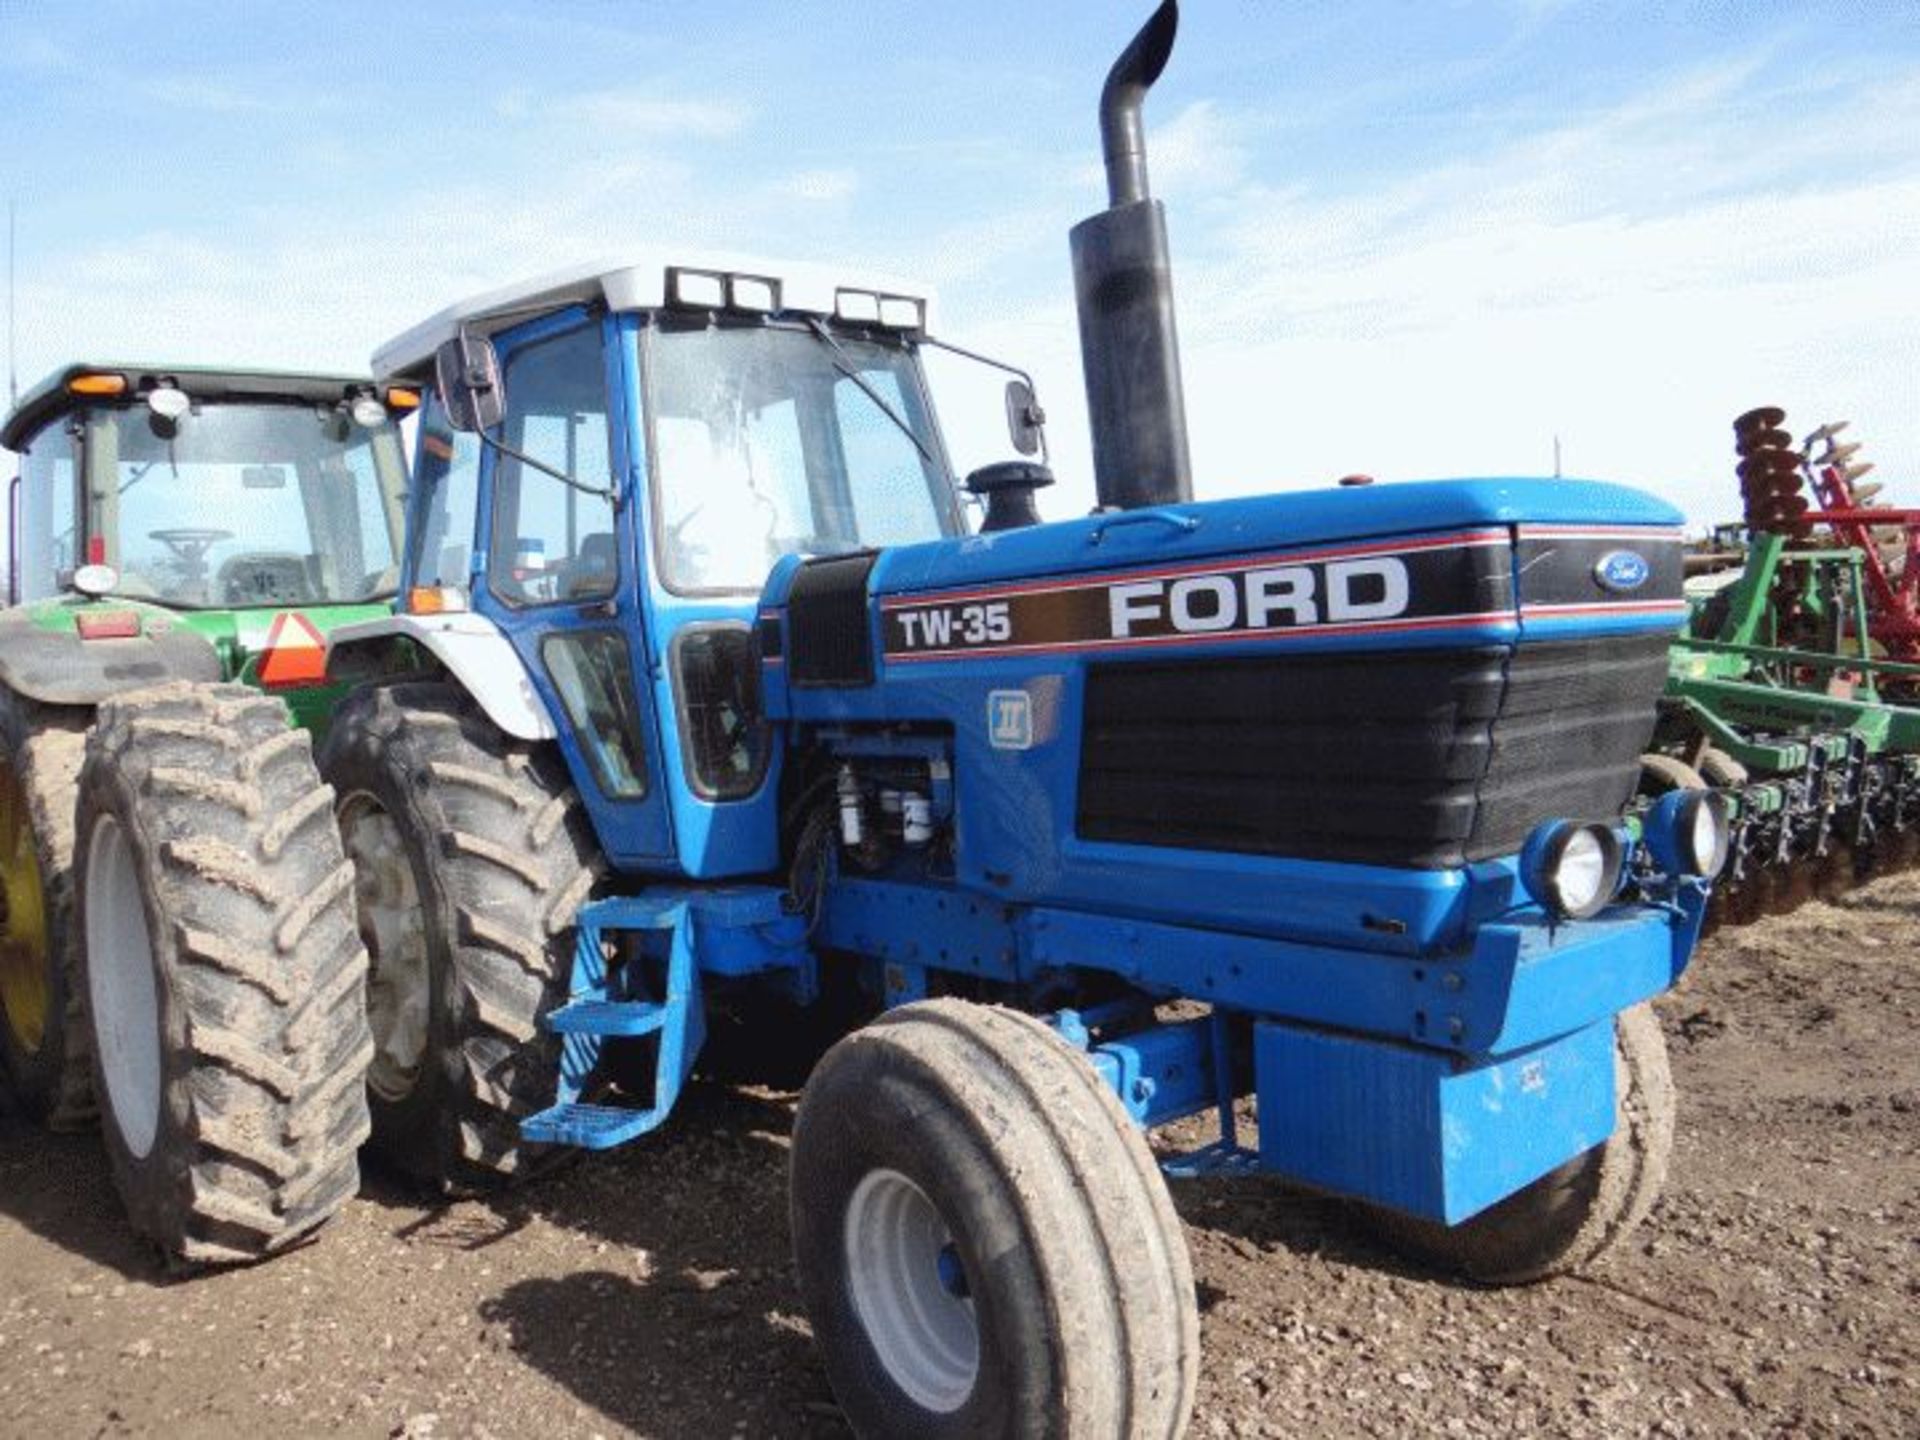 Lot # 2199 Ford TW35 Tractor, 1989 3300 hrs, Dual PTO, Duals - Image 2 of 4